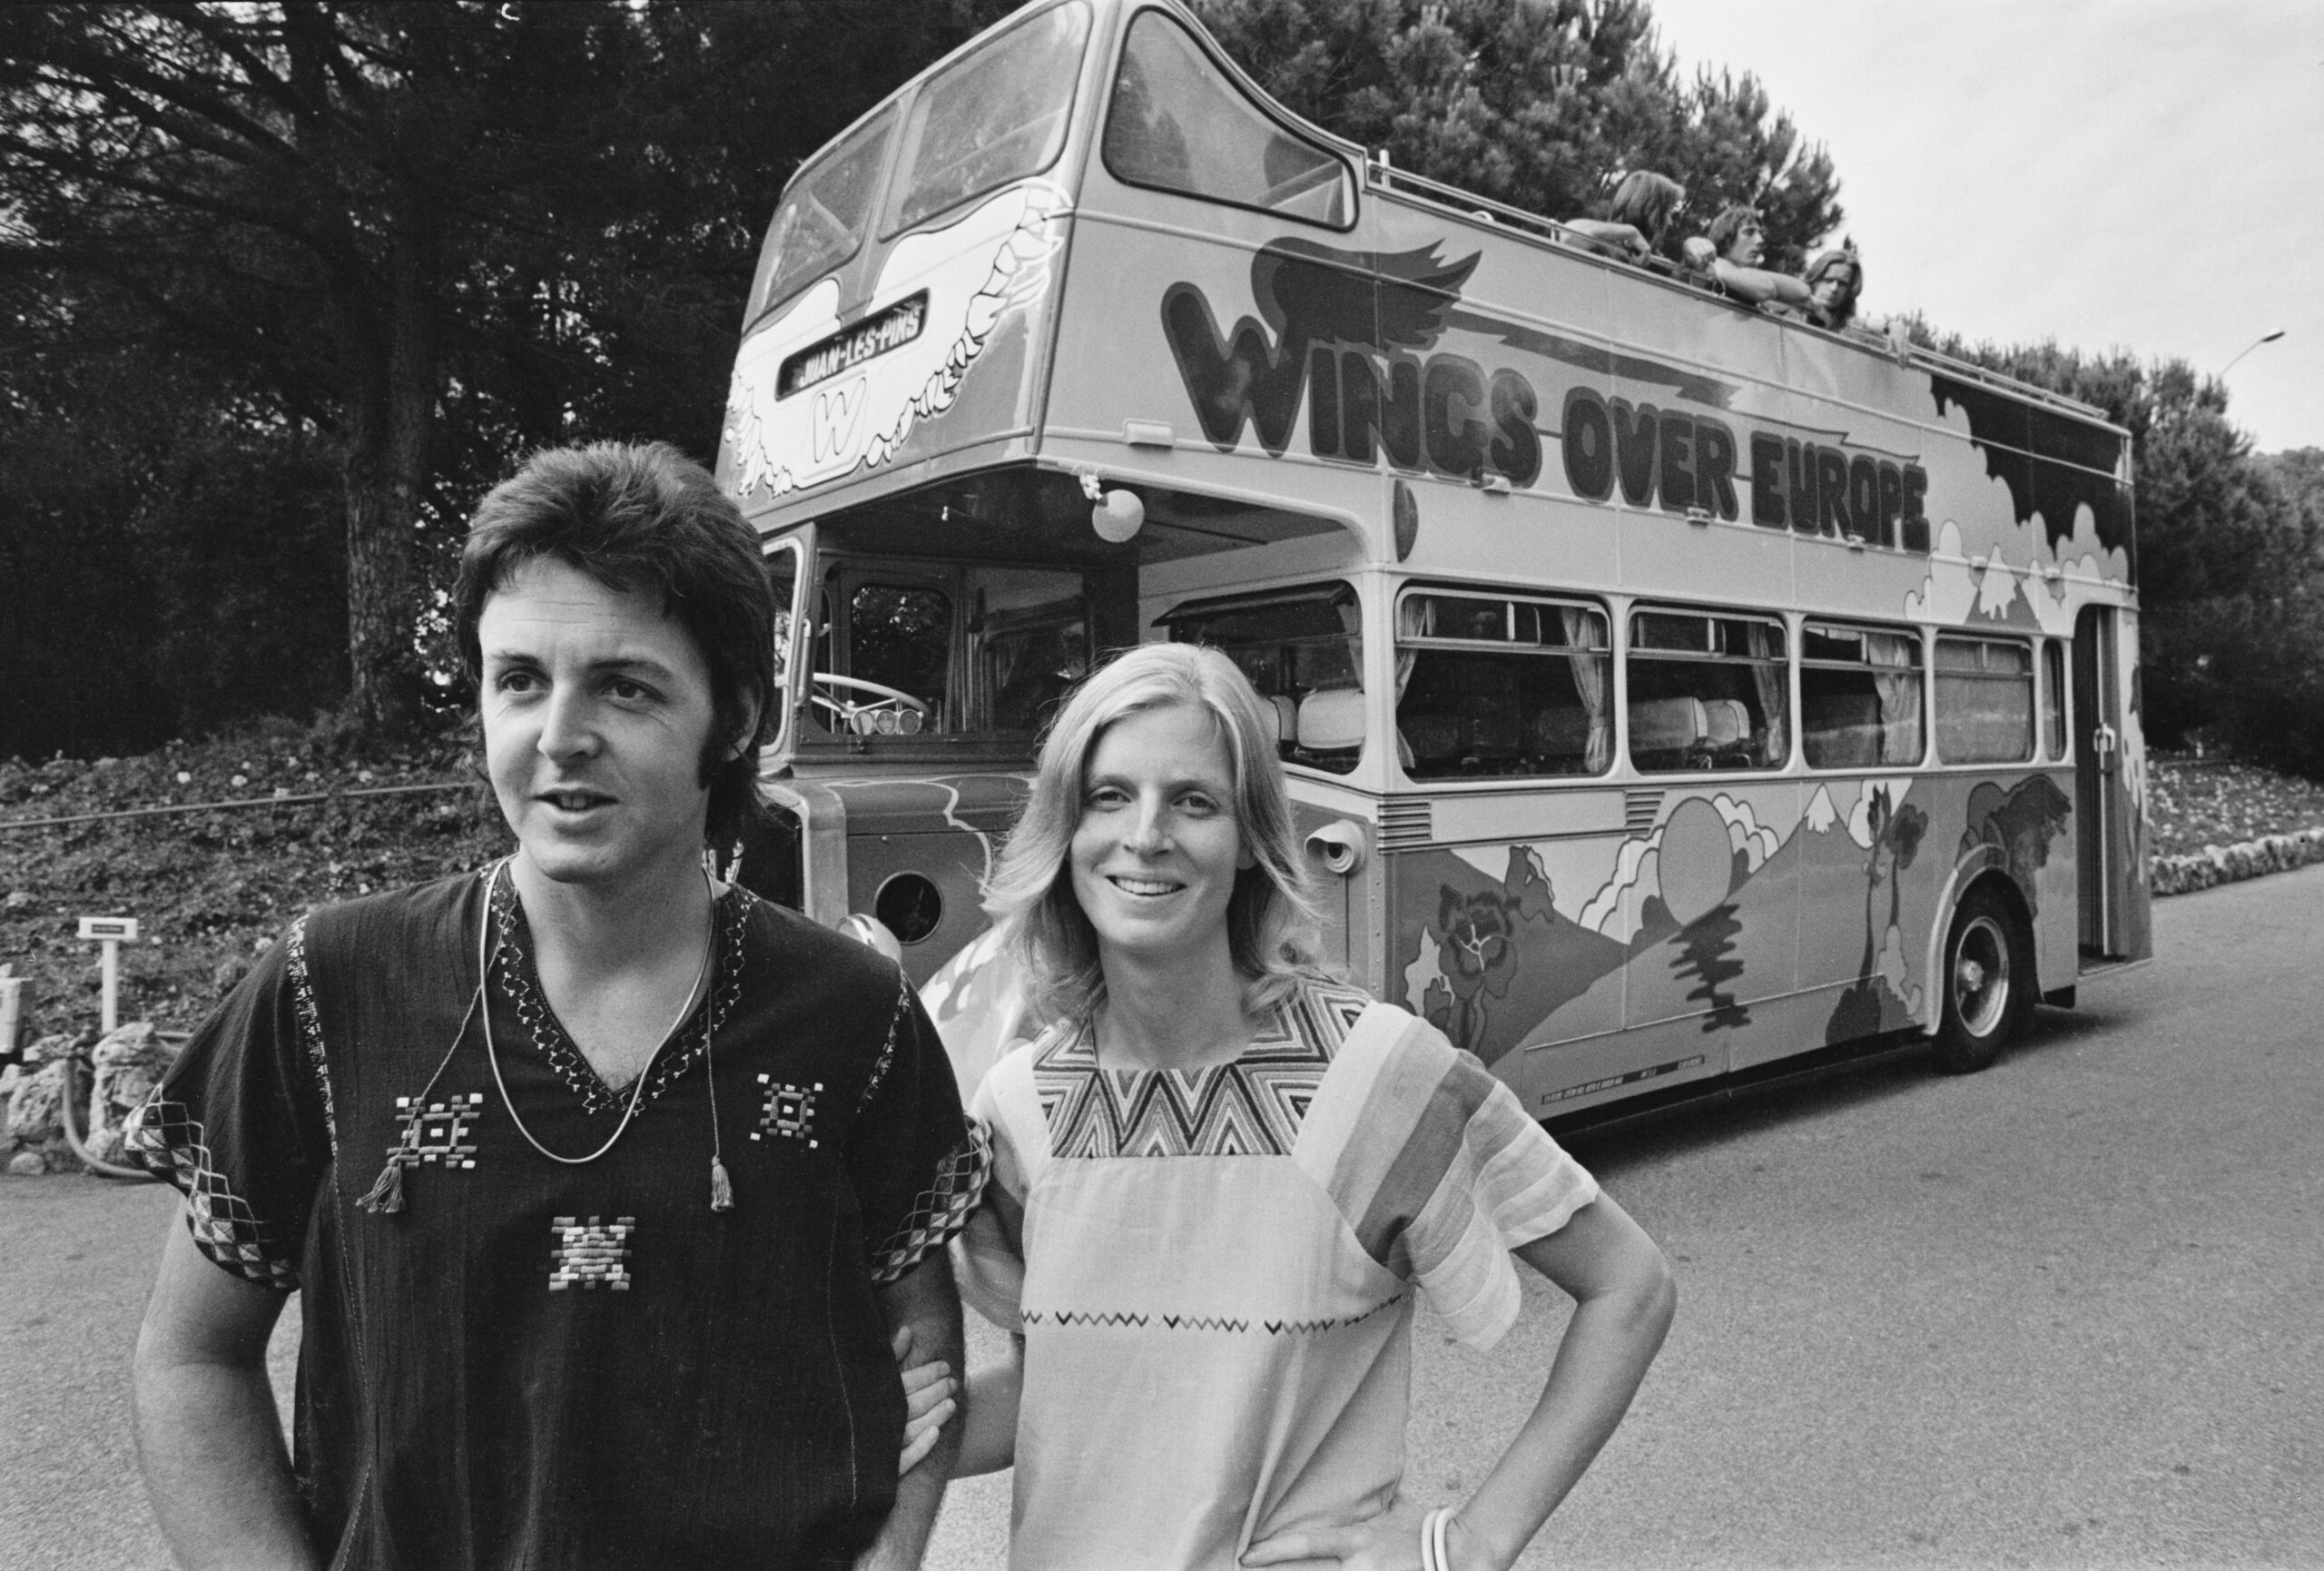 Paul McCartney and Wings’ 1972 European tour bus is a psychedelic wonder